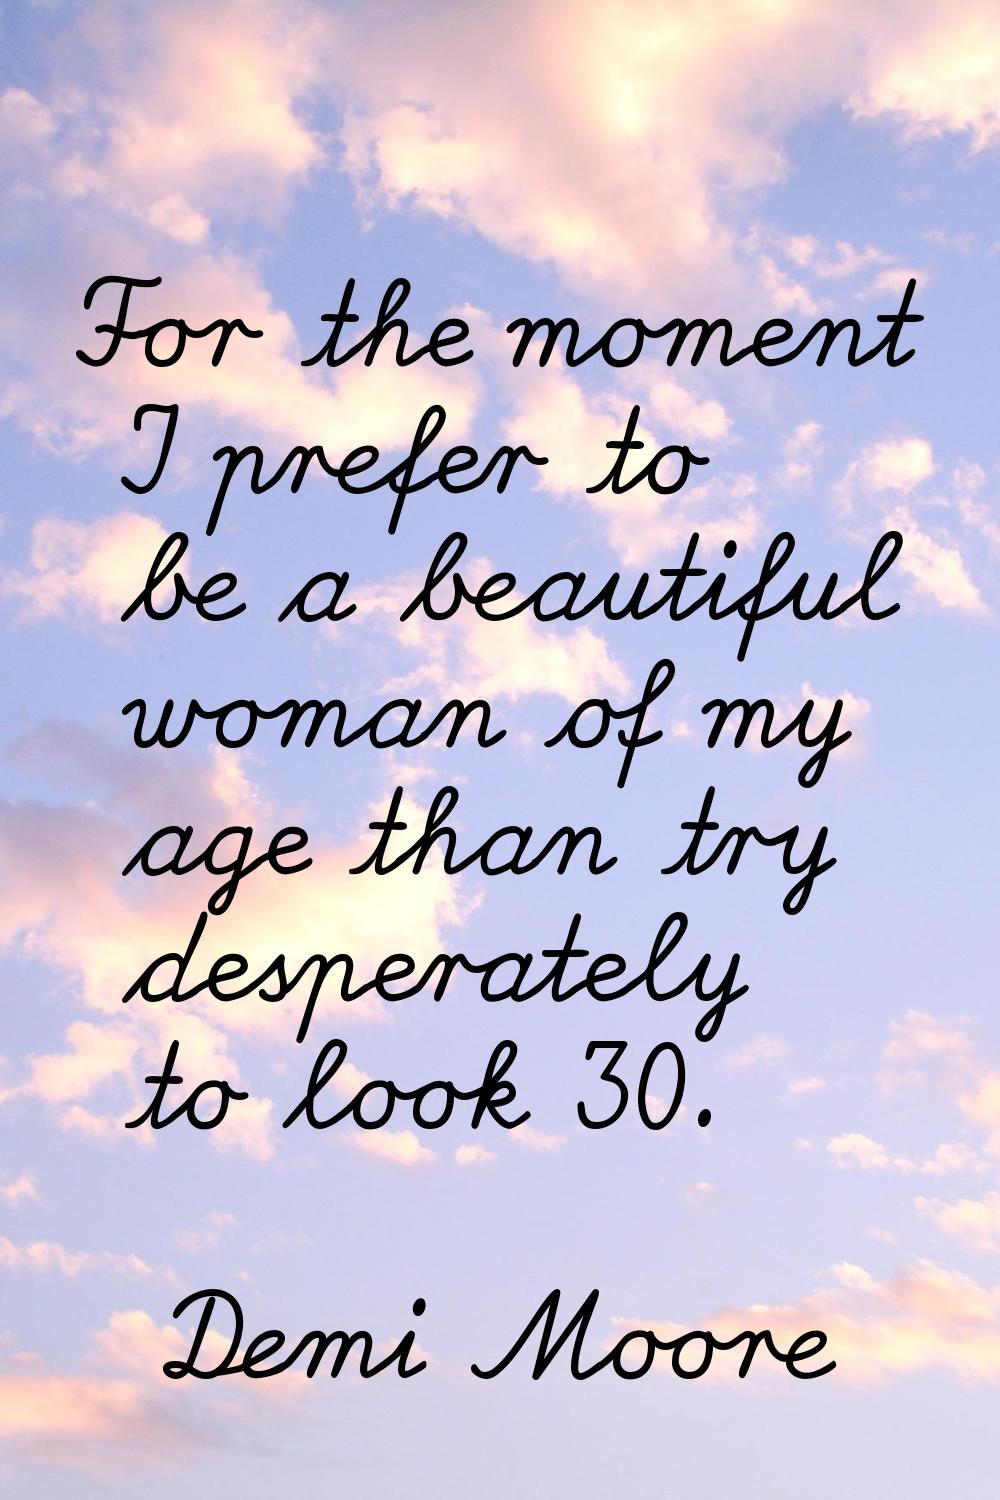 For the moment I prefer to be a beautiful woman of my age than try desperately to look 30.